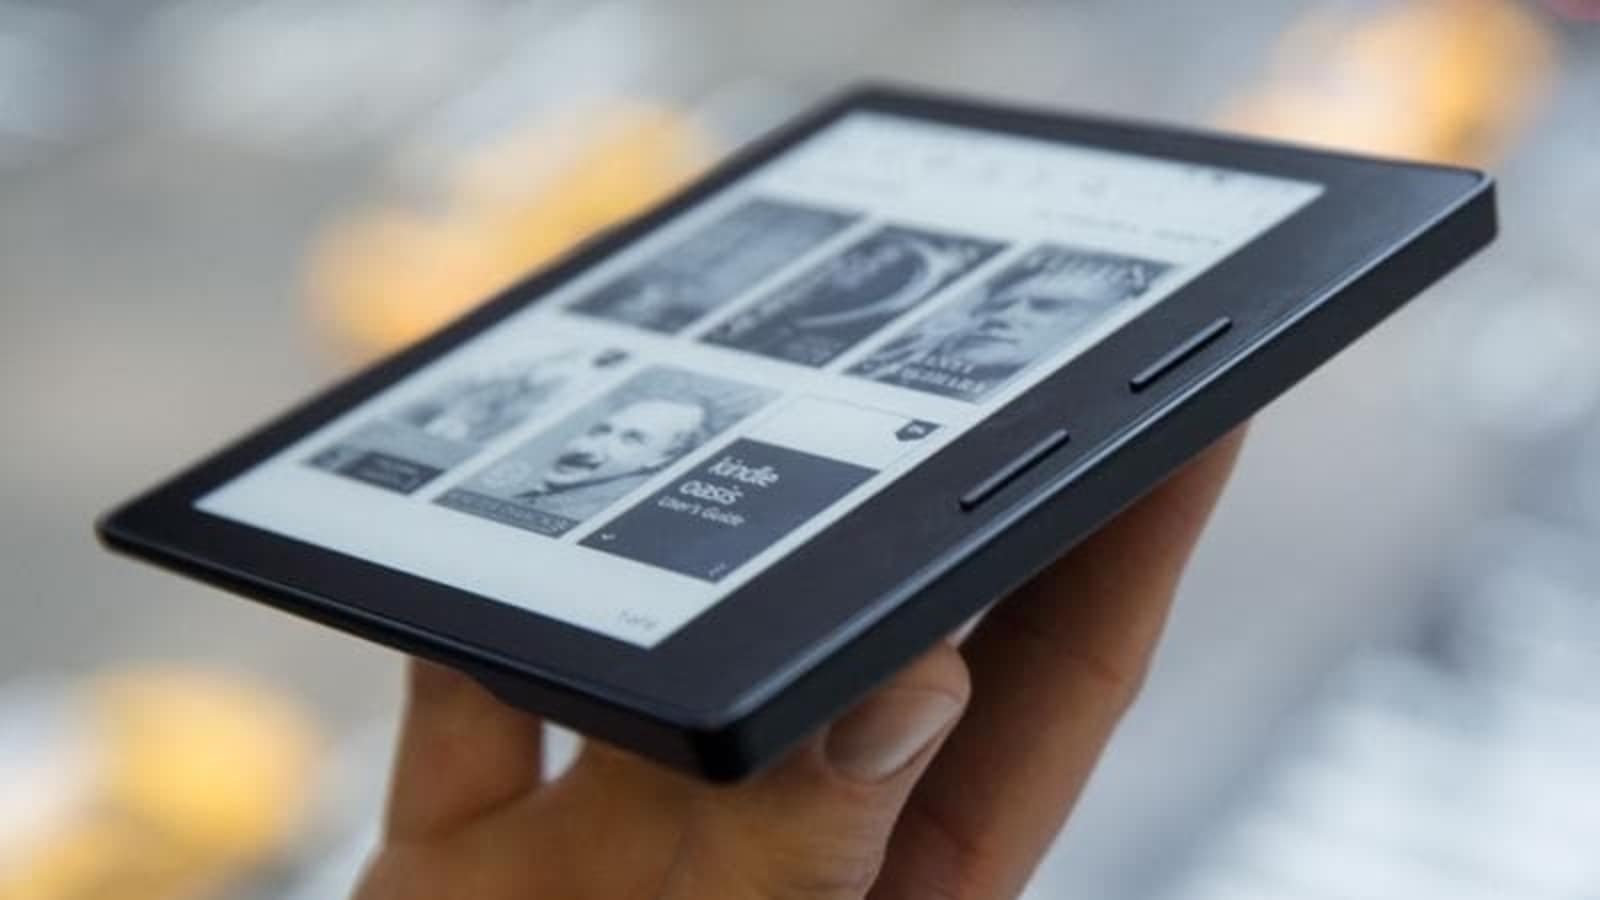 s new Kindle Oasis has a color-adjustable front light